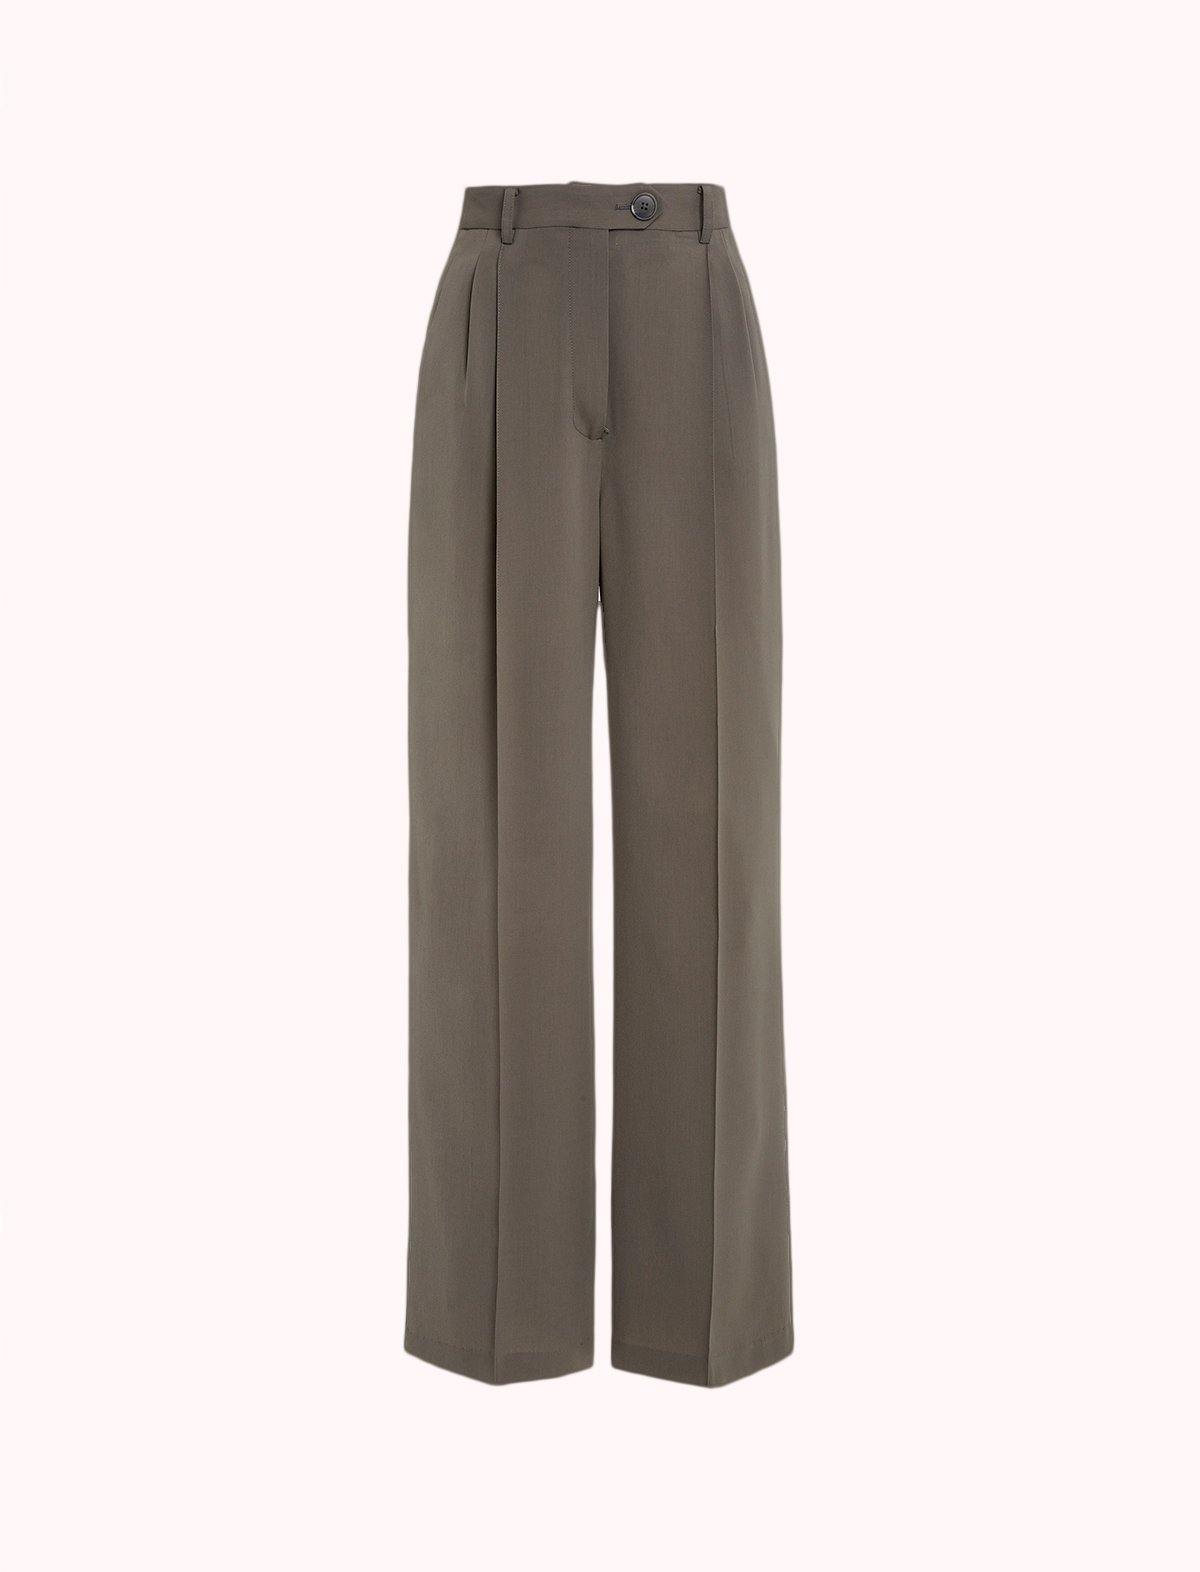 BEAUFILLE Burnell Trouser in Pewter Grey | CLOSET Singapore